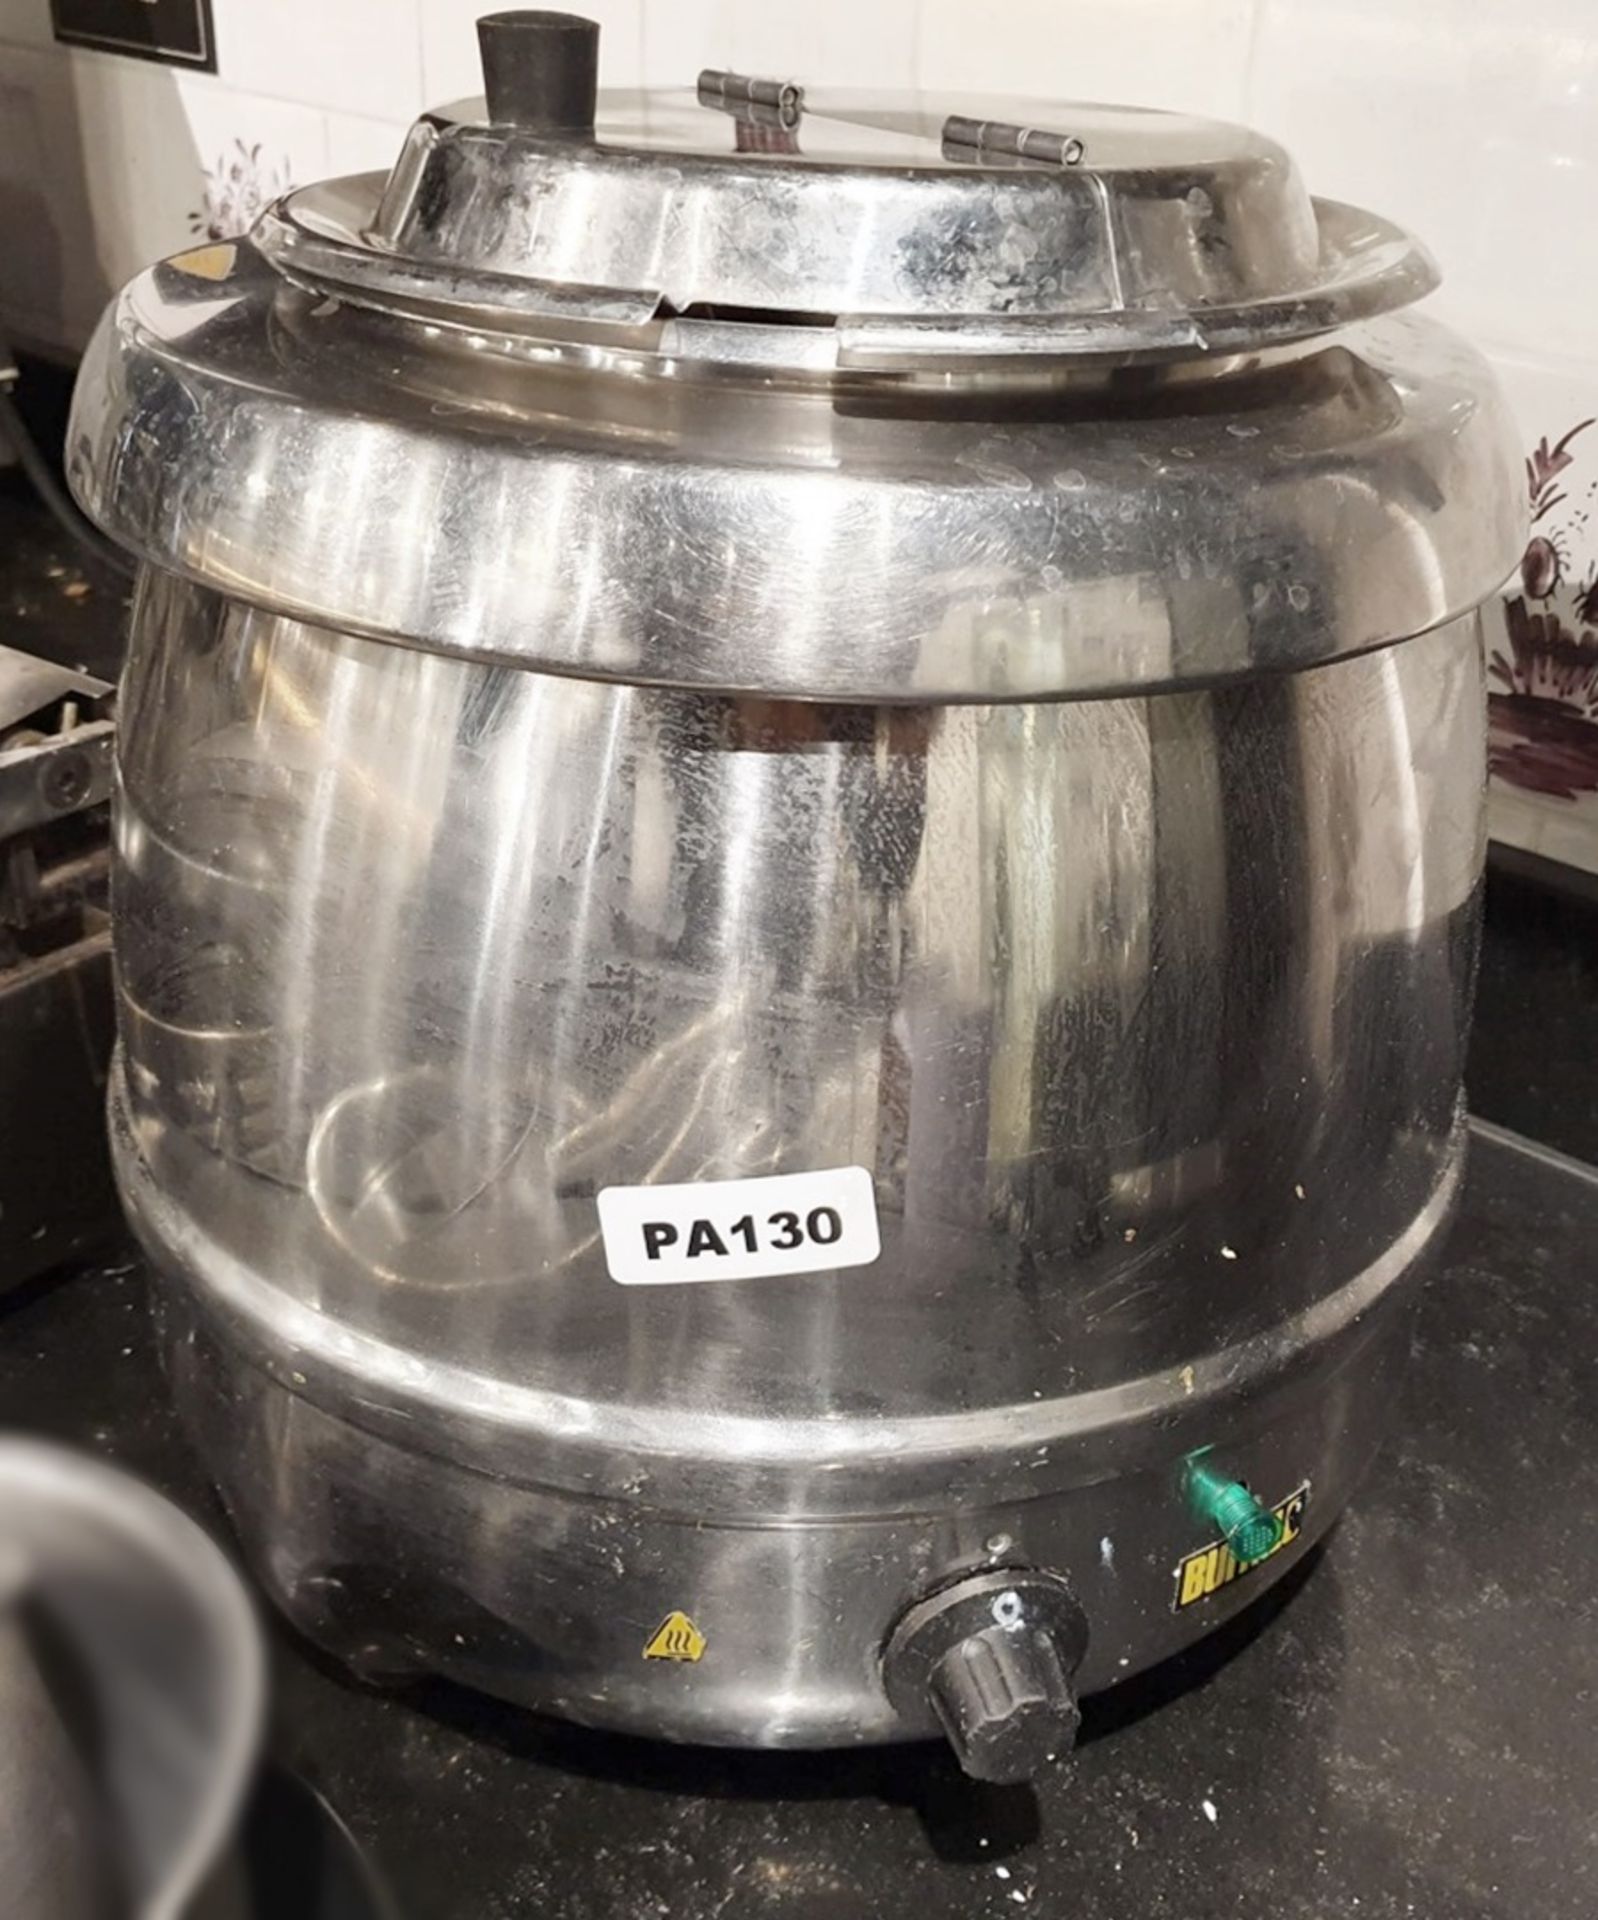 1 x Buffalo Stainless Steel Soup Kettle - 240v - Ref PA130 - CL463 - Location: Newbury RG14